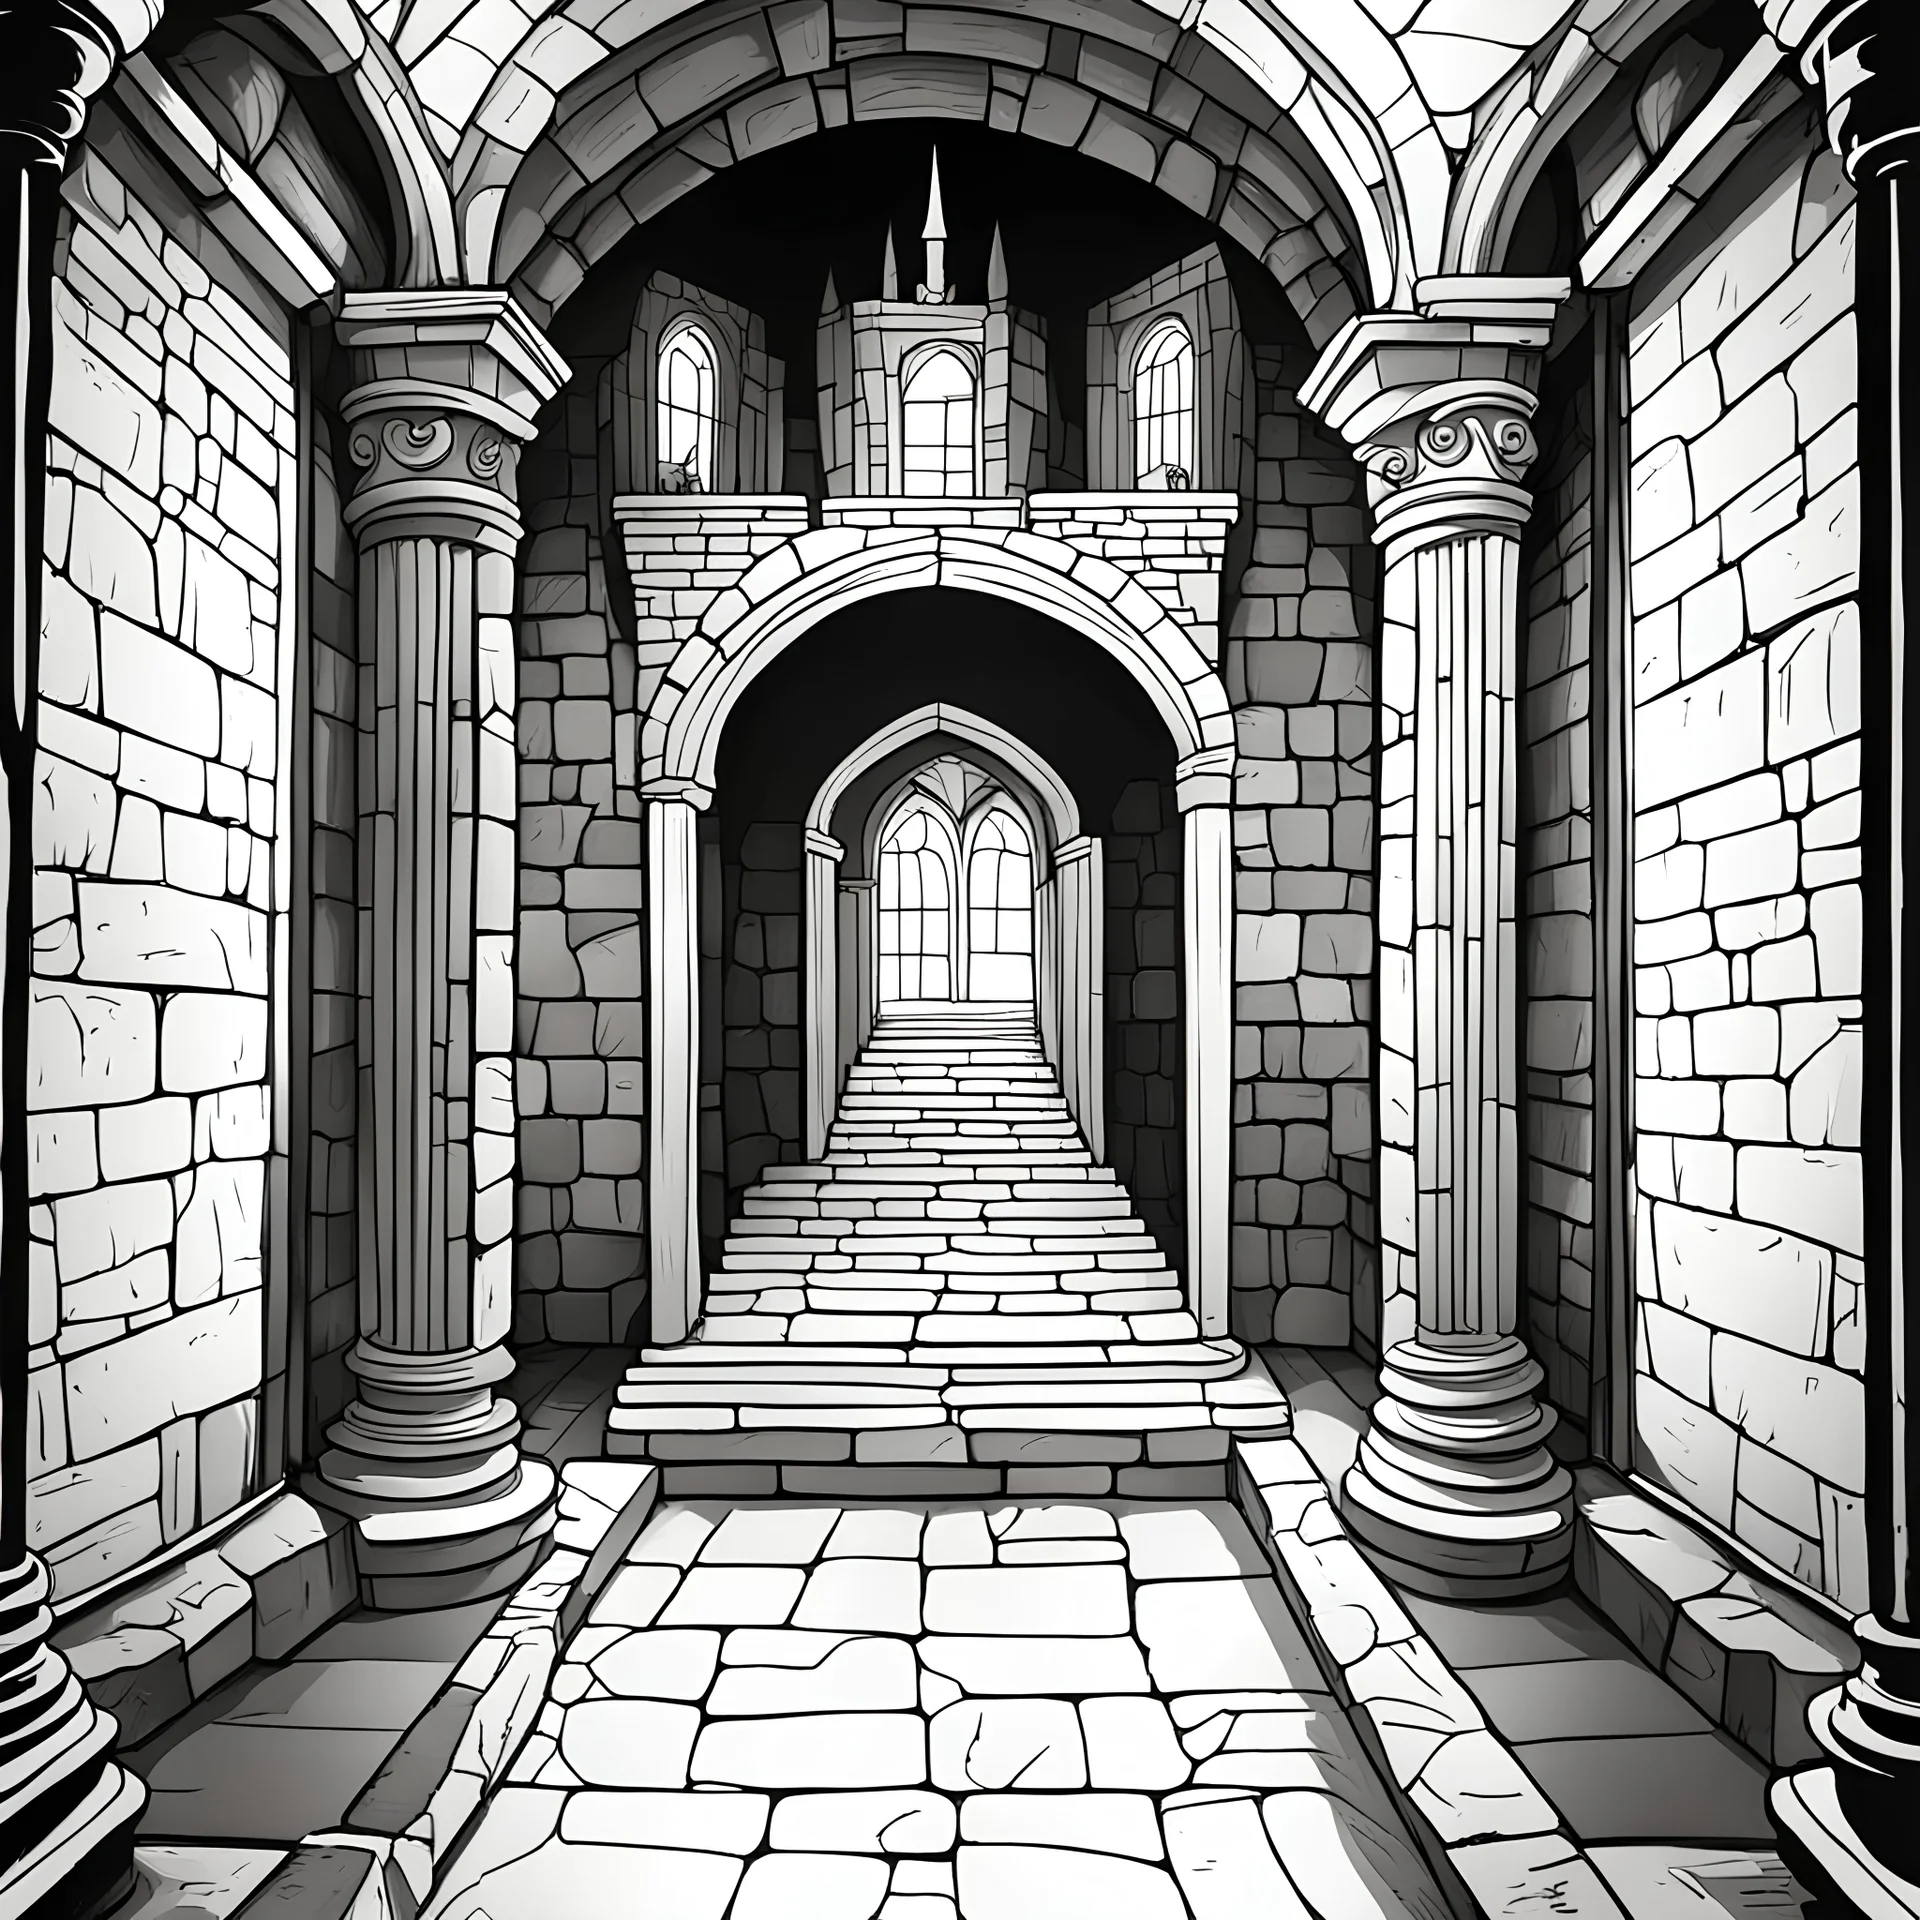 create a coloring book page of a looked room in a stony castle, black and white, high contrast